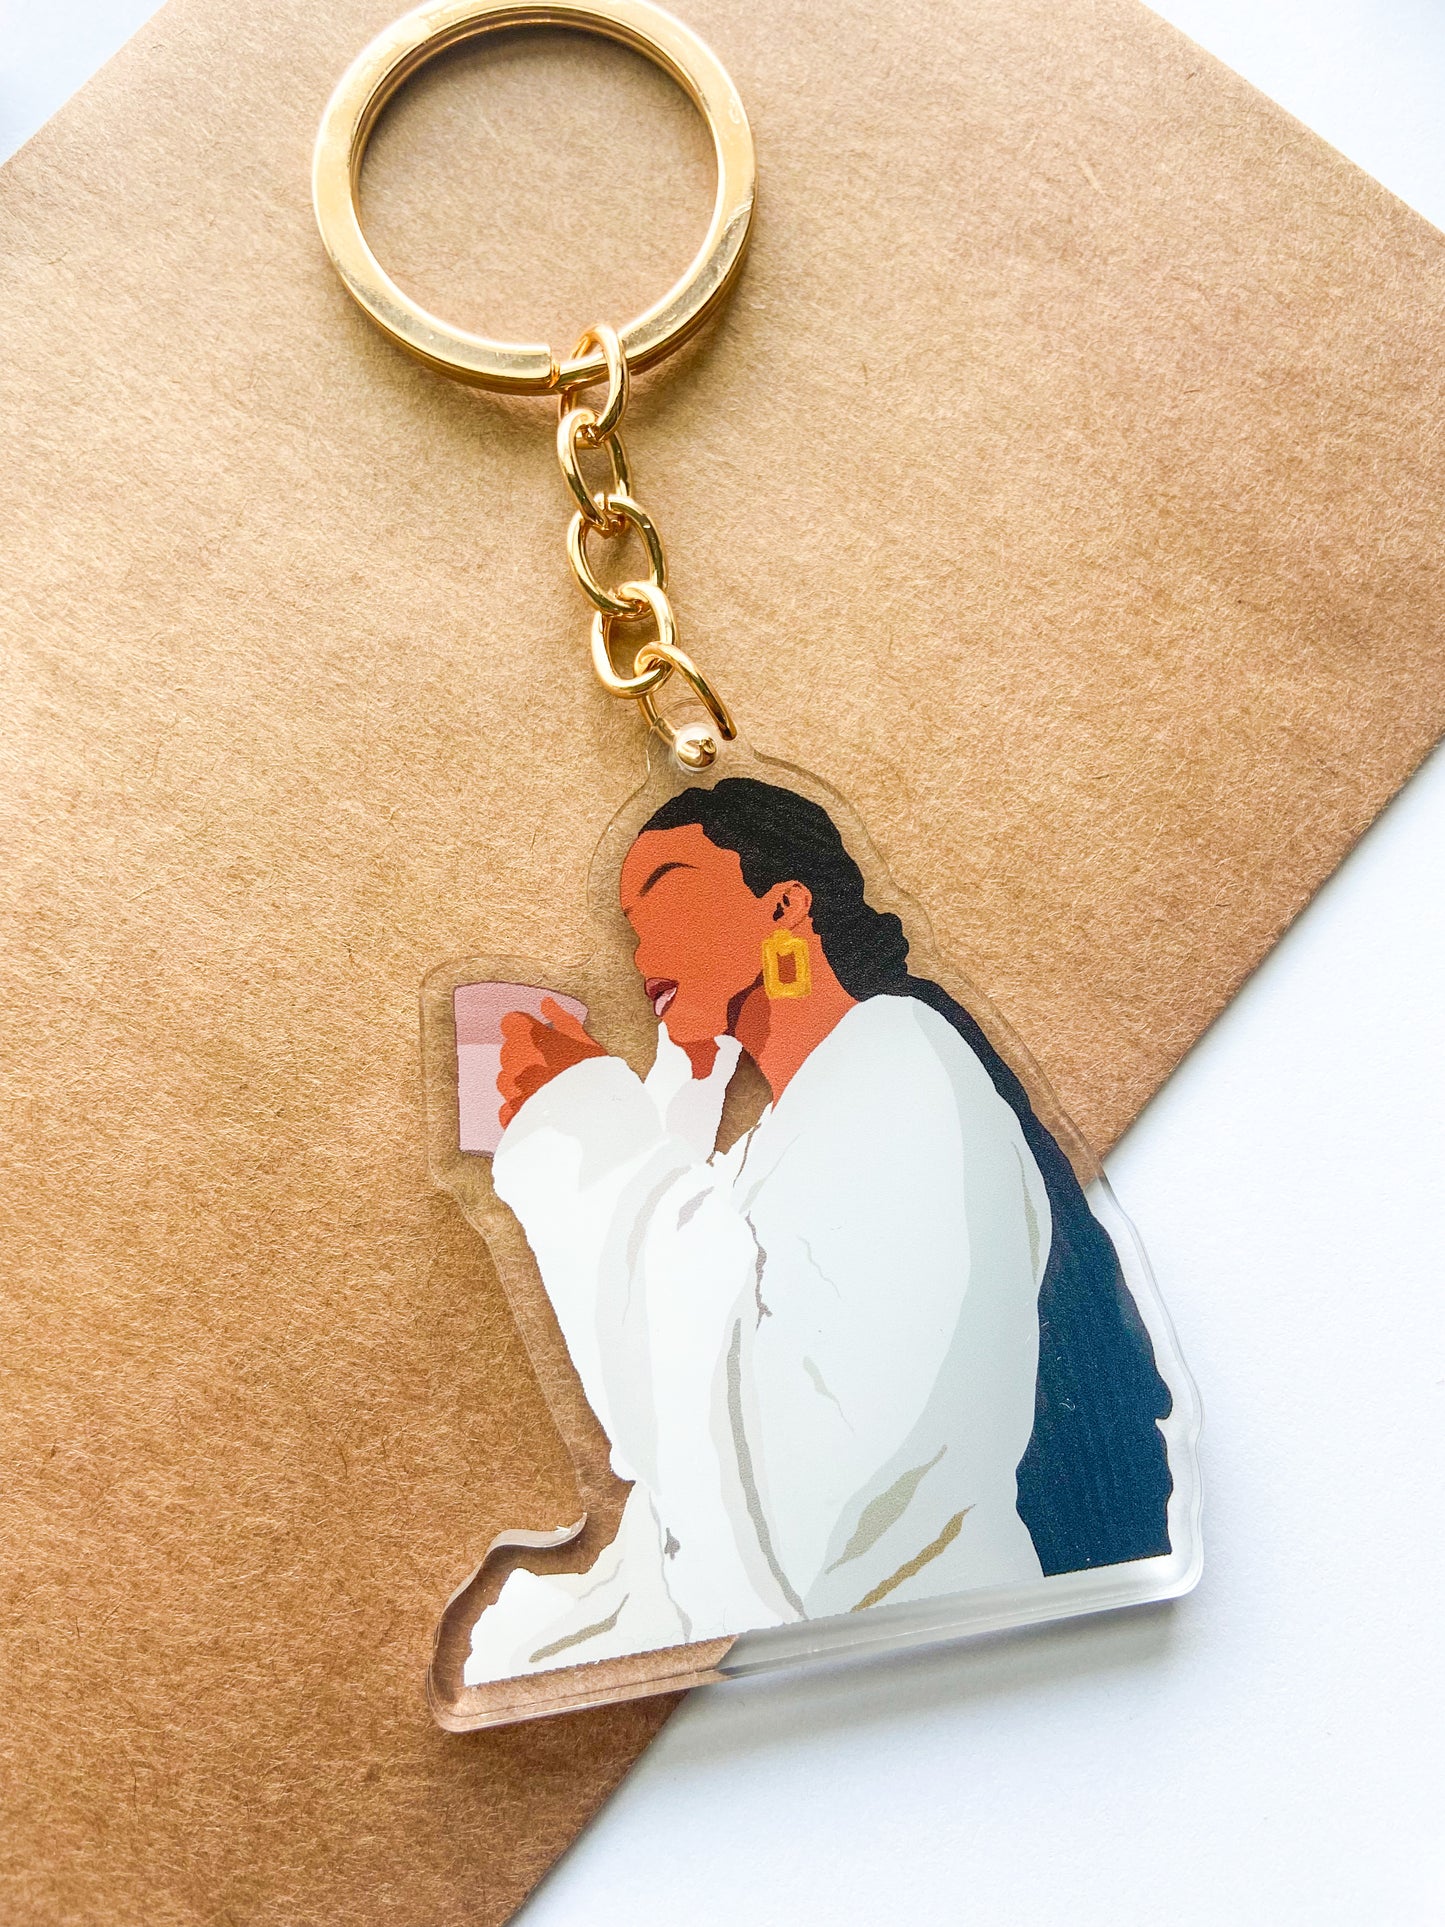 "At Peace" Illustrated Acrylic Keychain